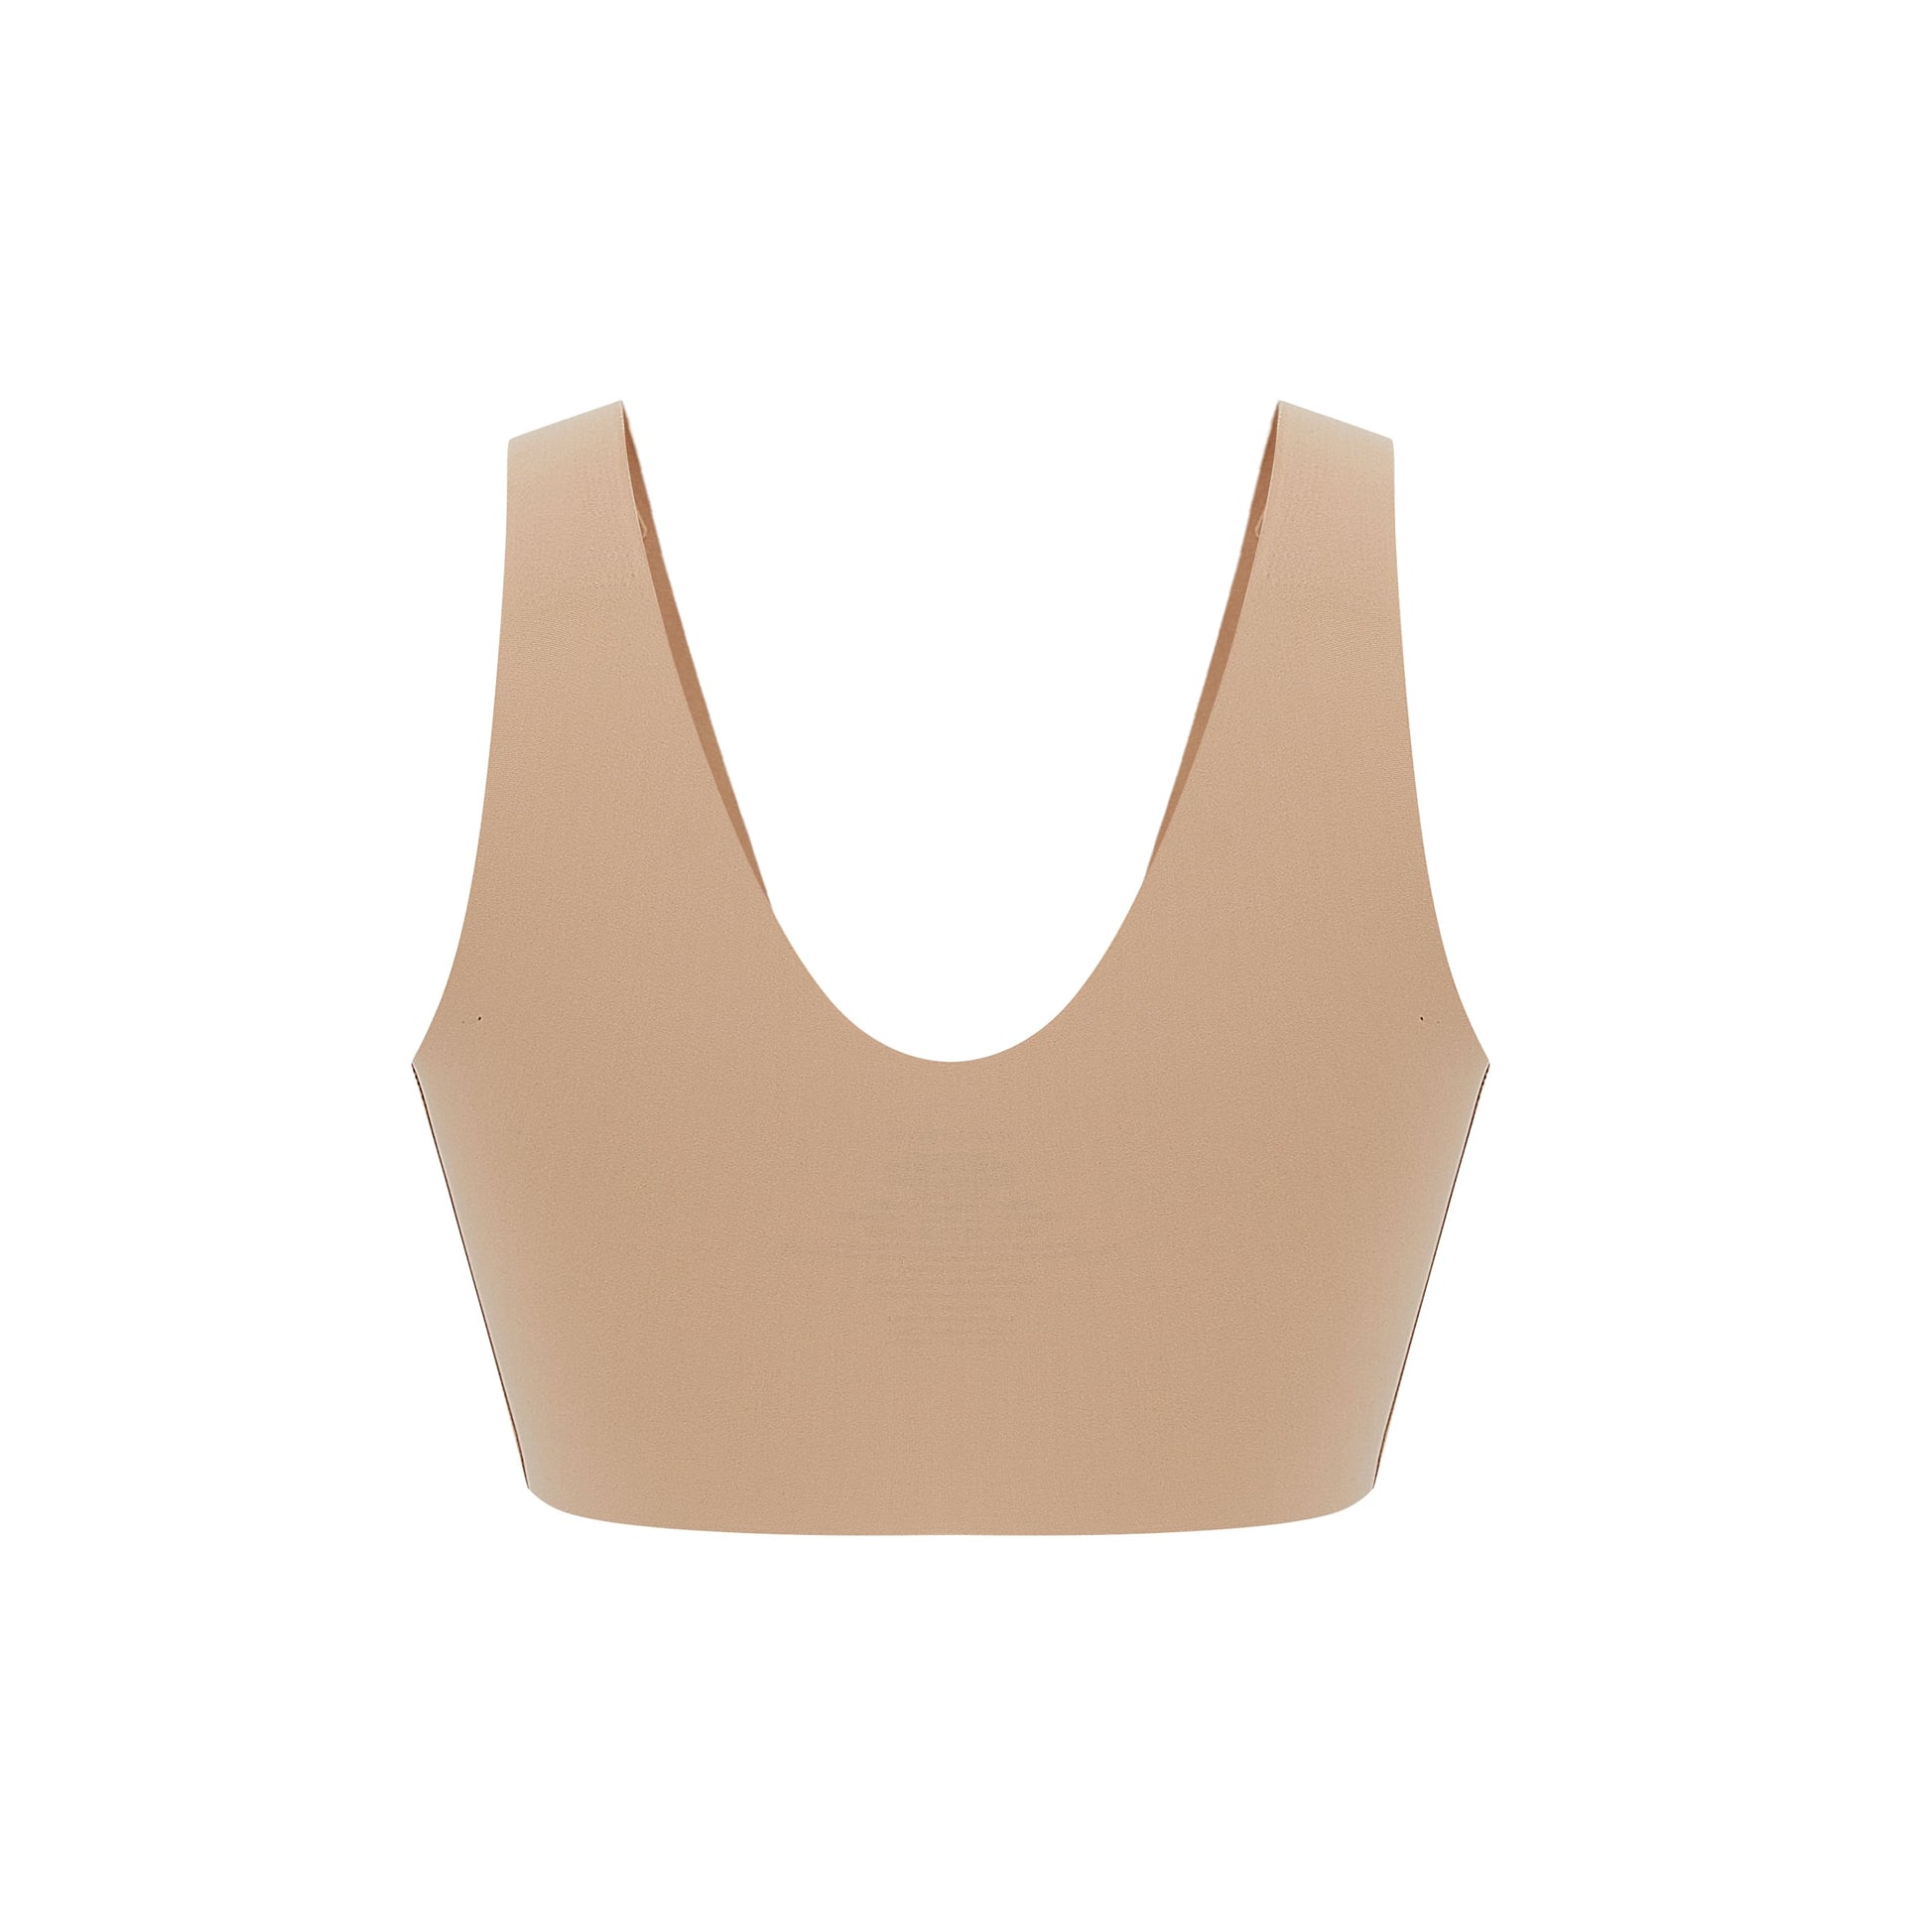 back view of a light nude color Barely Zero Classic Bra, which is a pull-over style with thick stripes.